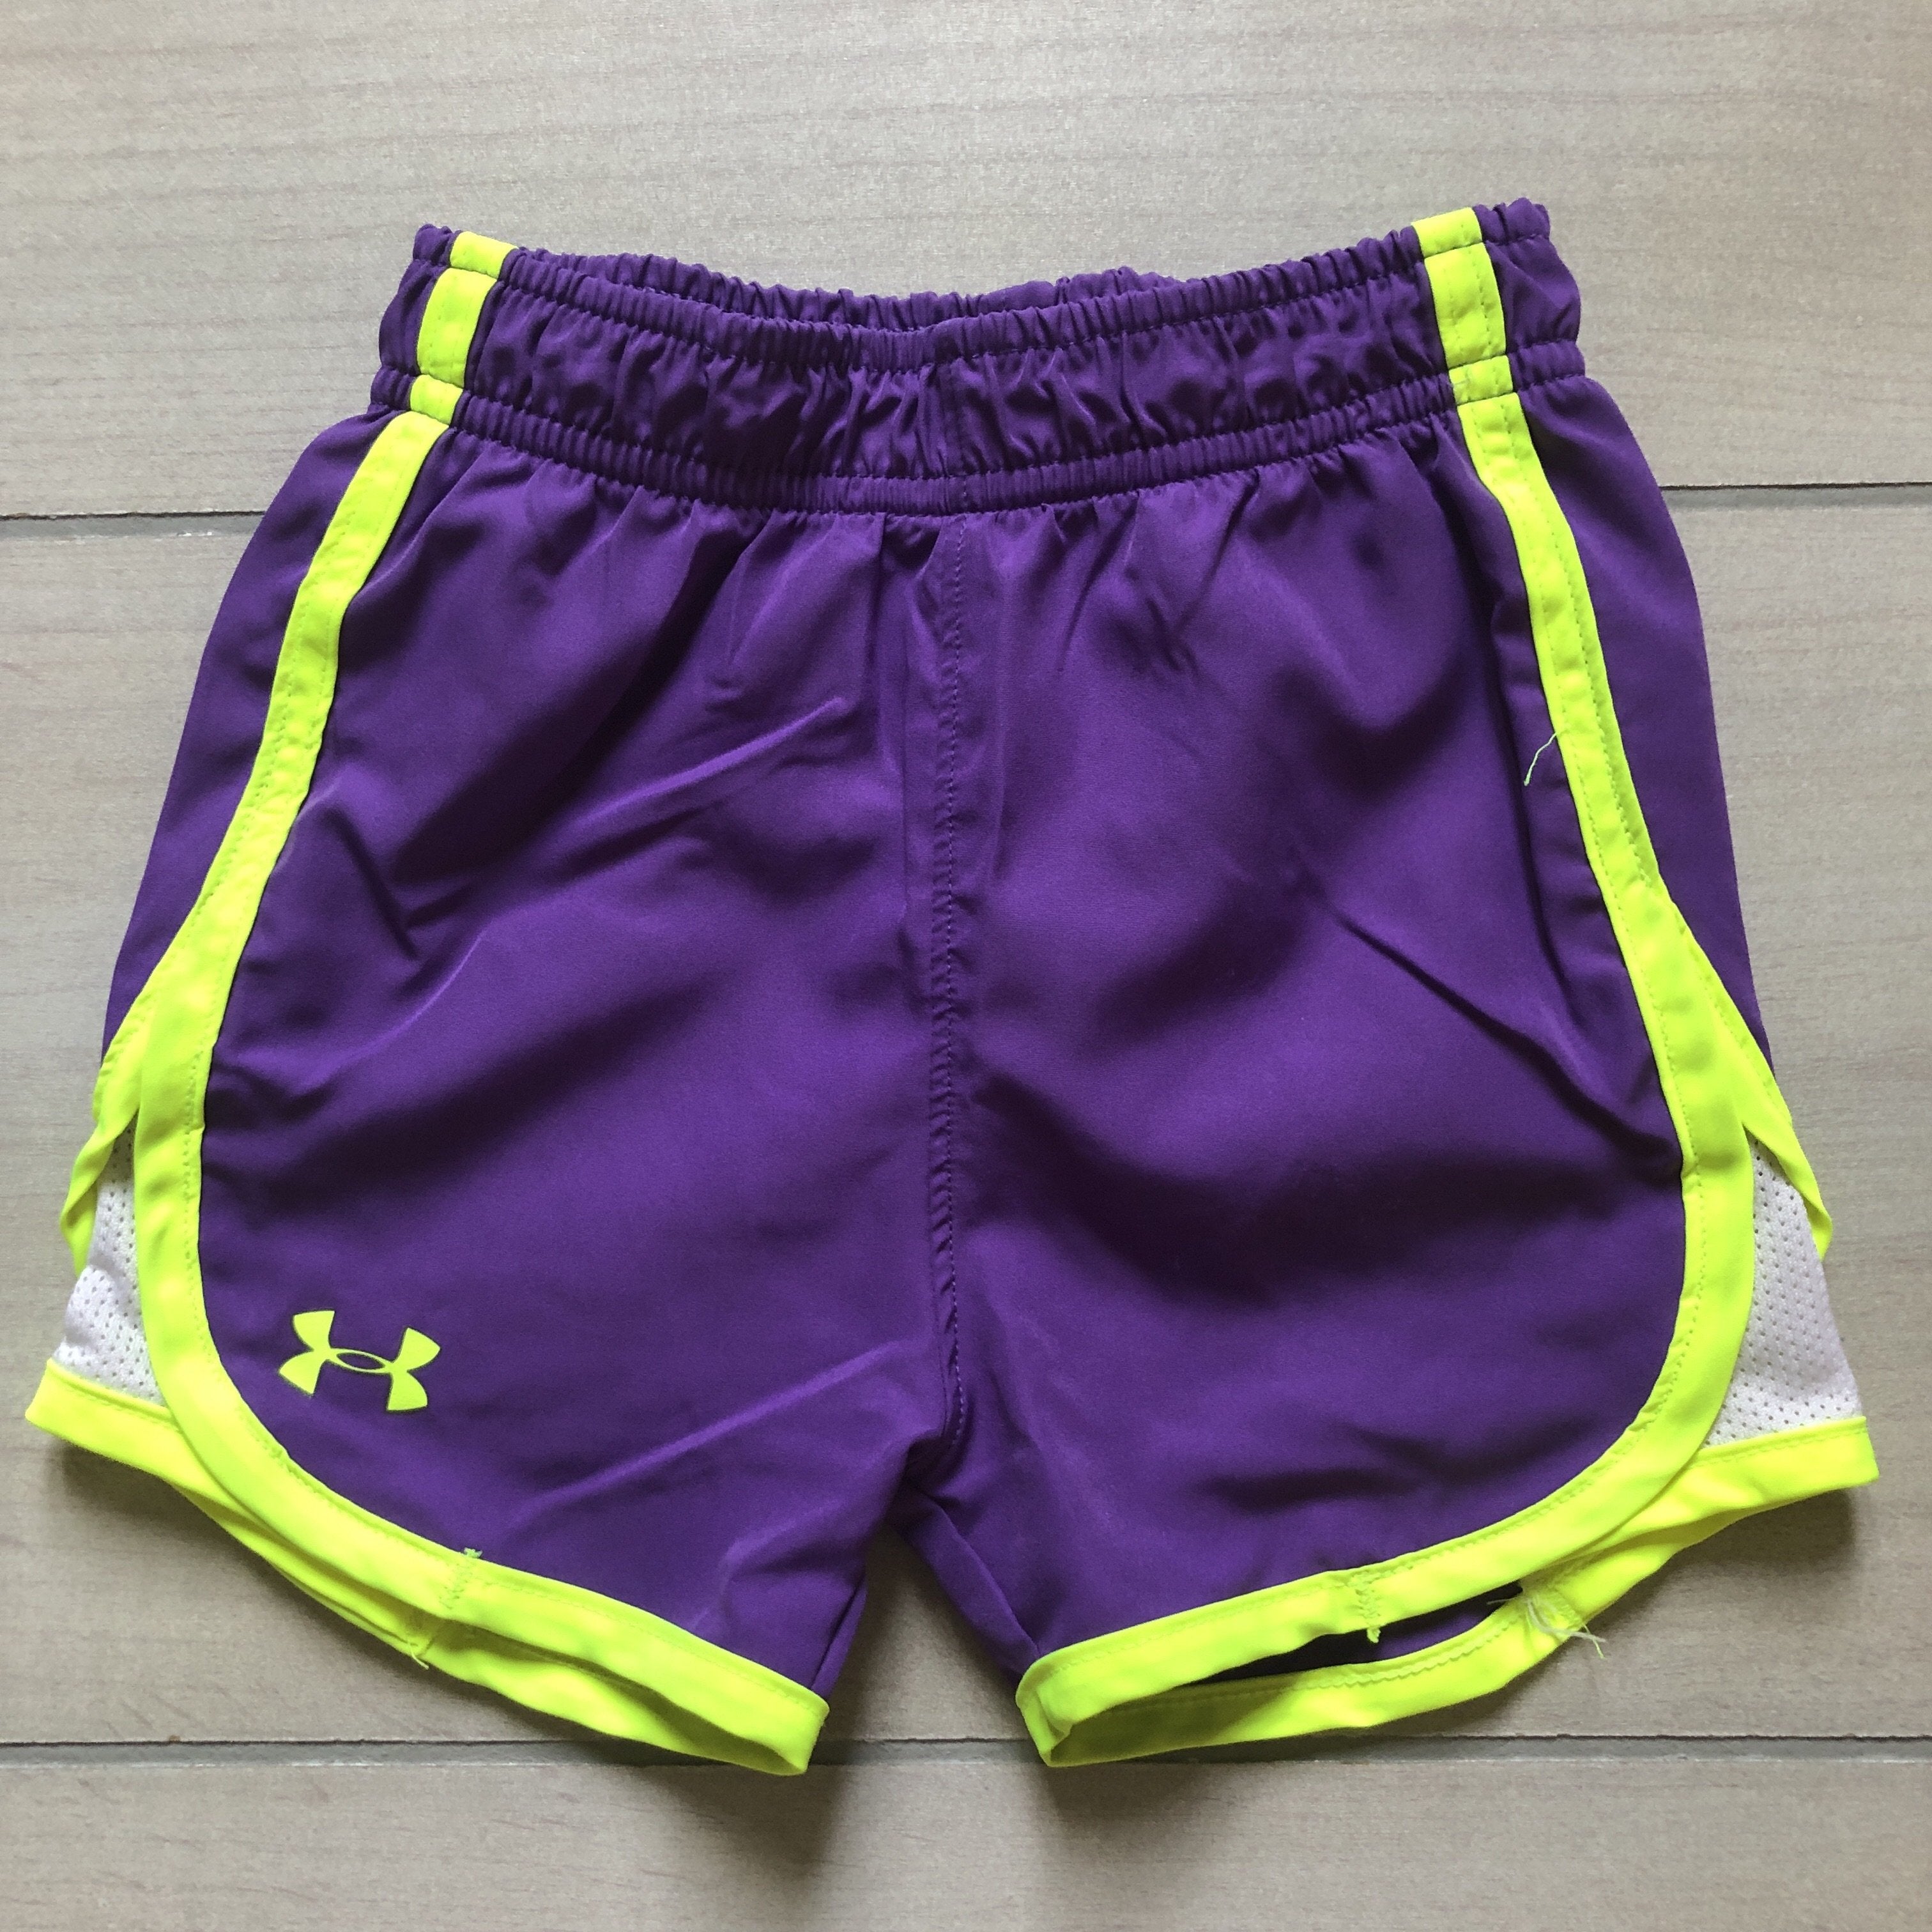 Women's Under Armour Shorts from £12